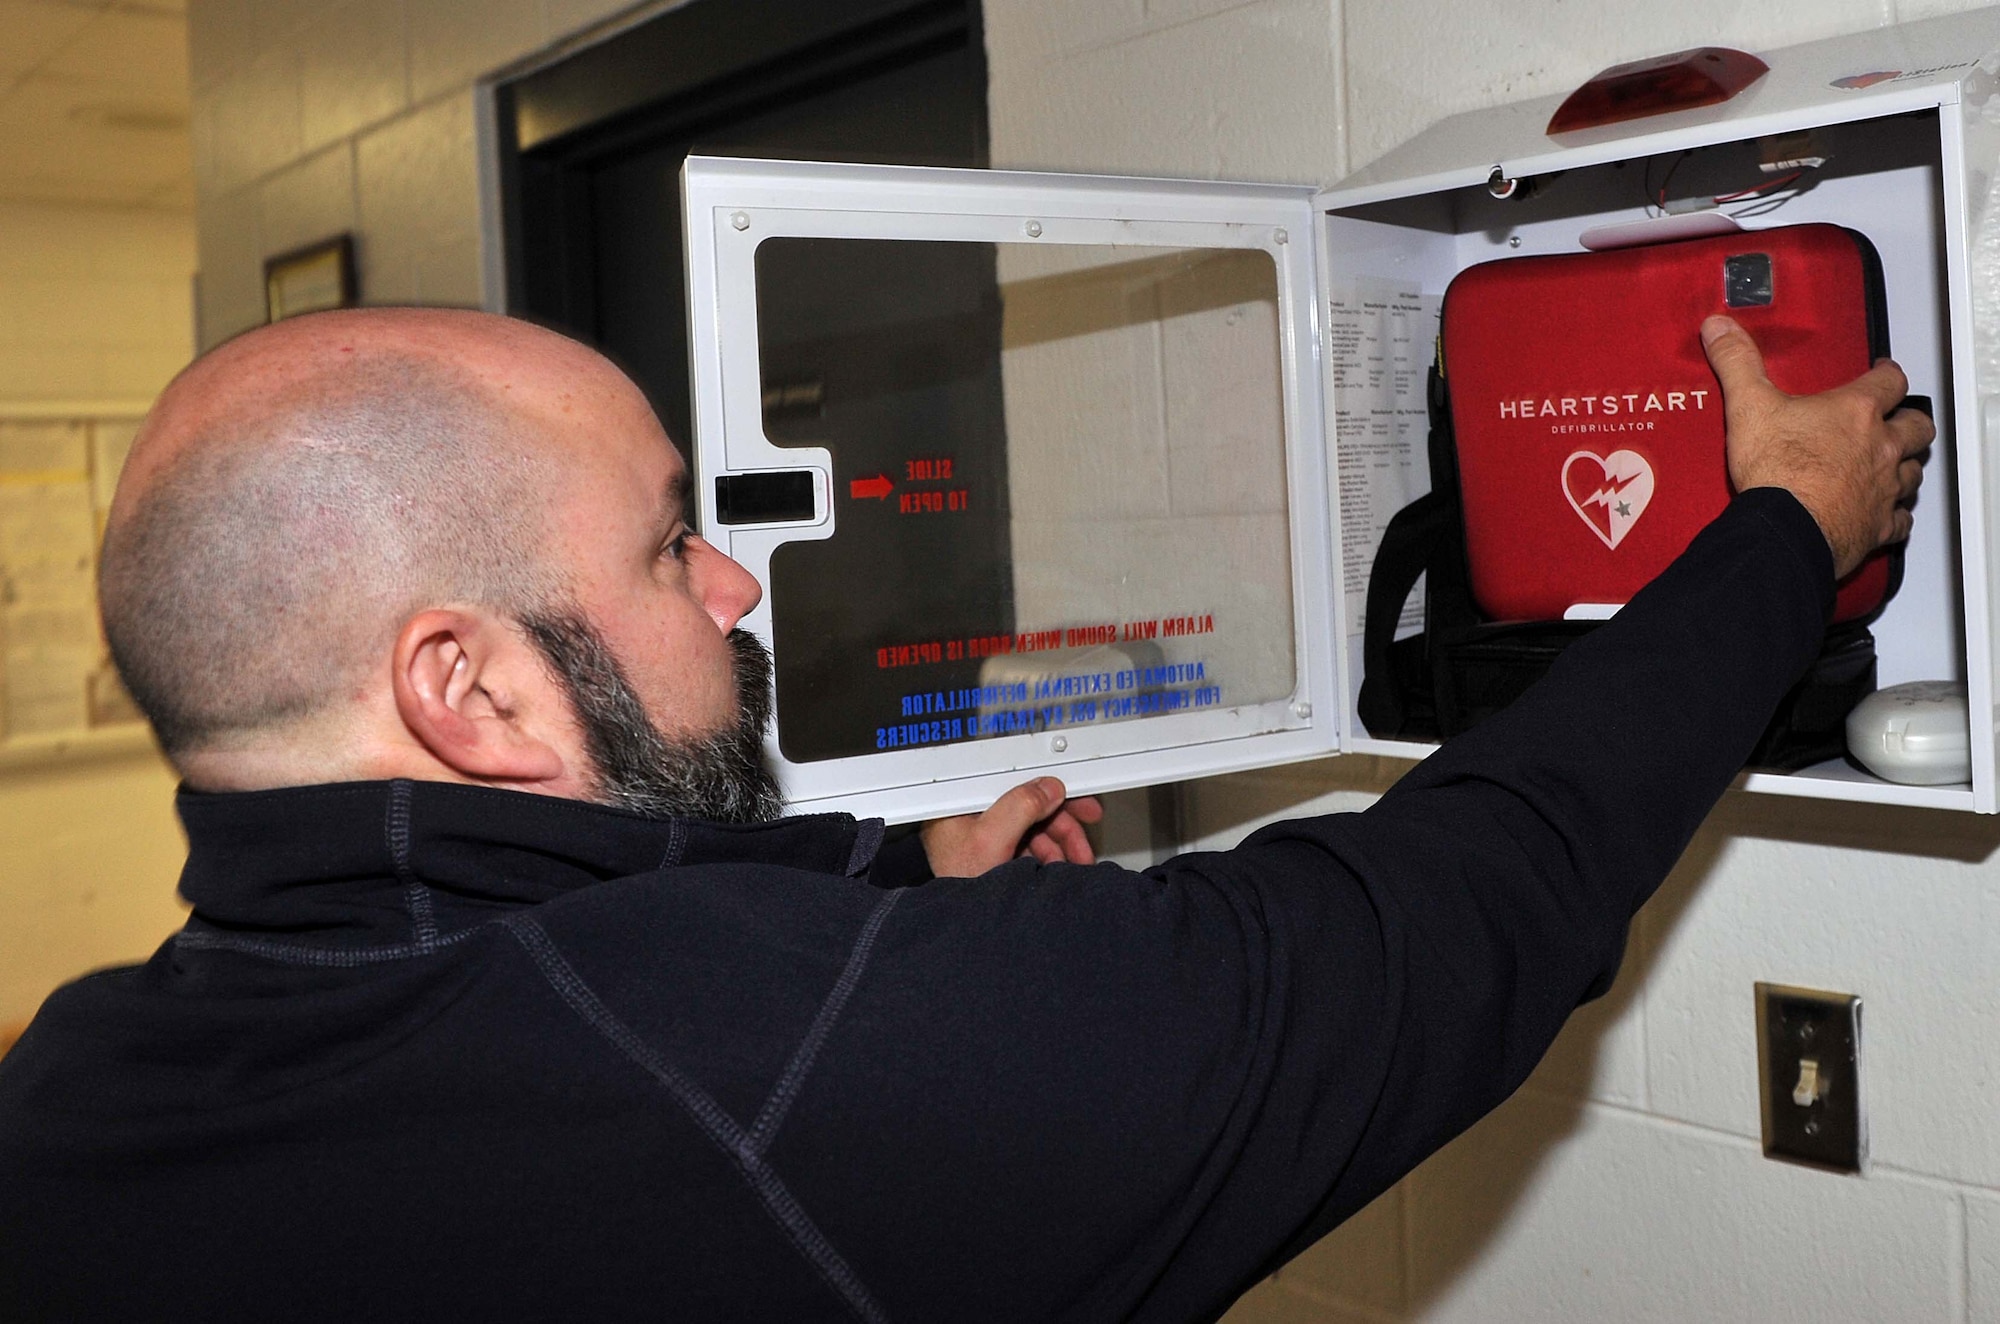 Scott Peavy, Fitness Program coordinator, retrieves an Automated External Defibrillator from its casing in the lobby of the Base Fitness Center. (U.S. Air Force photo by Tommie Horton)